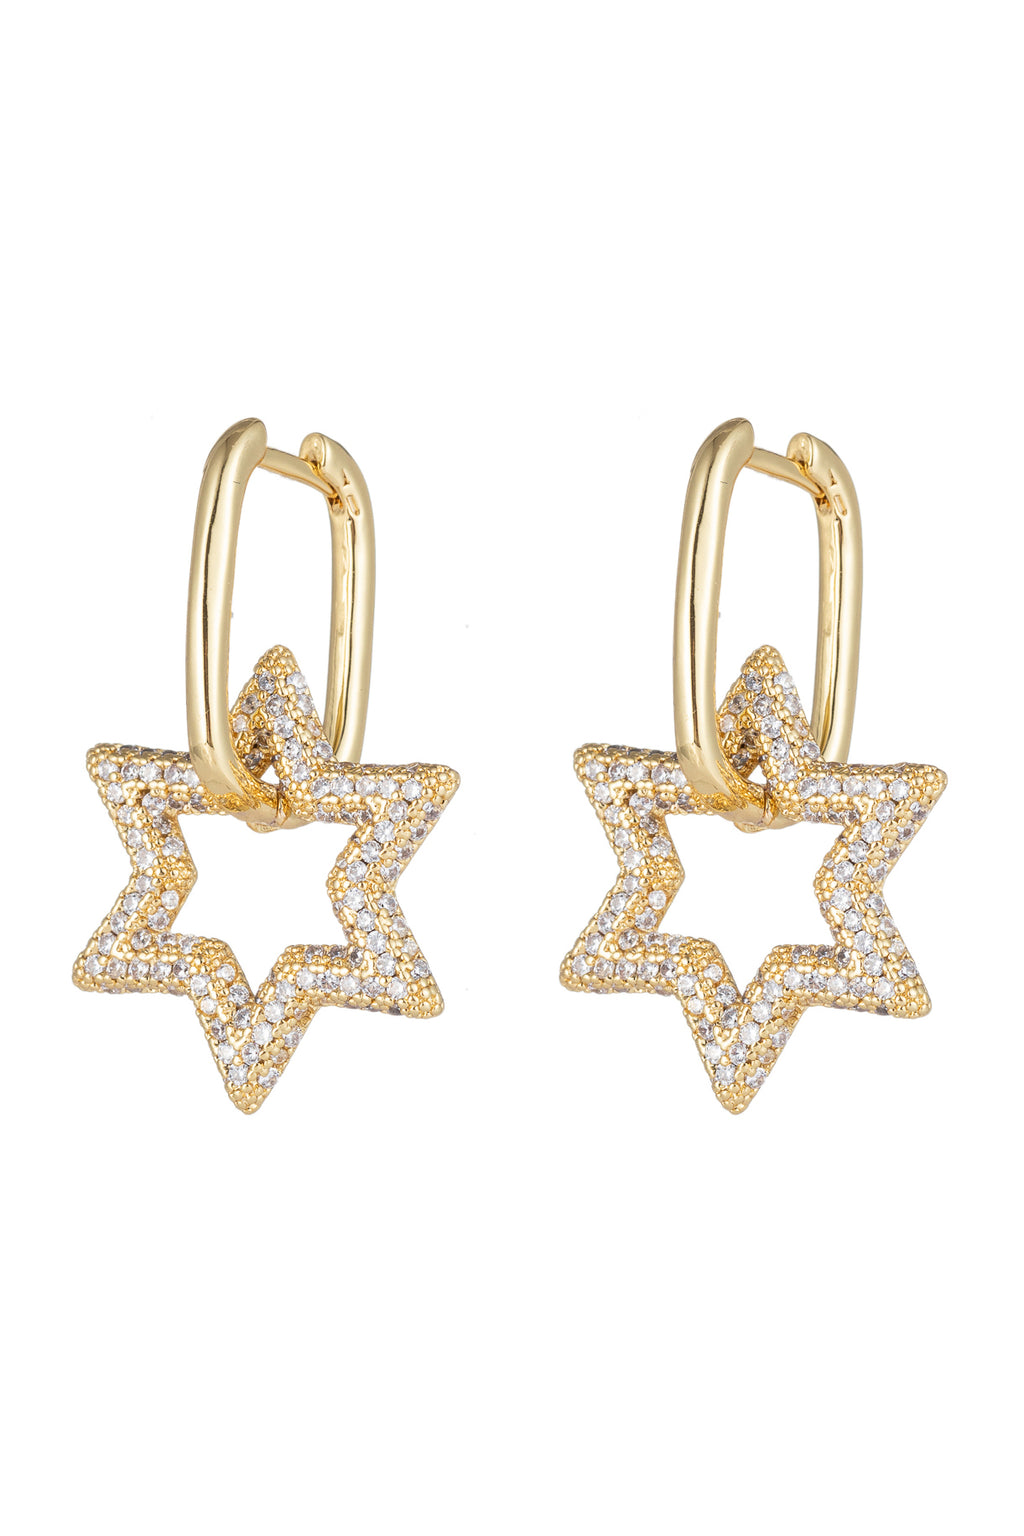 Double star 18k gold plated huggie earrings studded with CZ crystals.